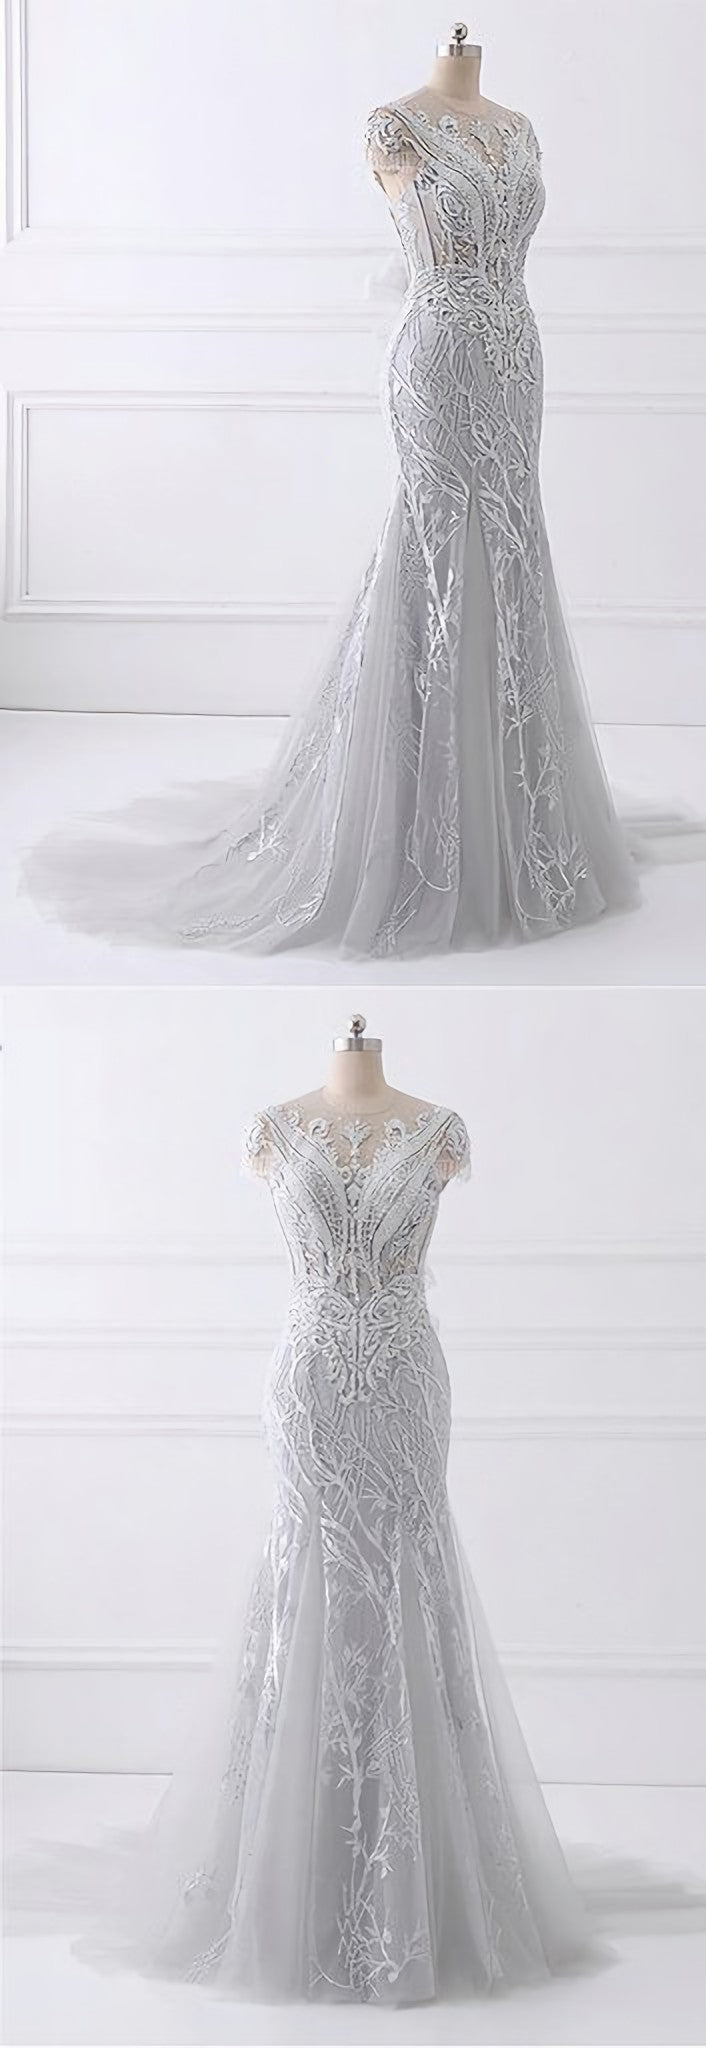 Party Dress Christmas, Spring Gray Tulle Long Mermaid Prom Dress, Beaded Lace Evening Gown